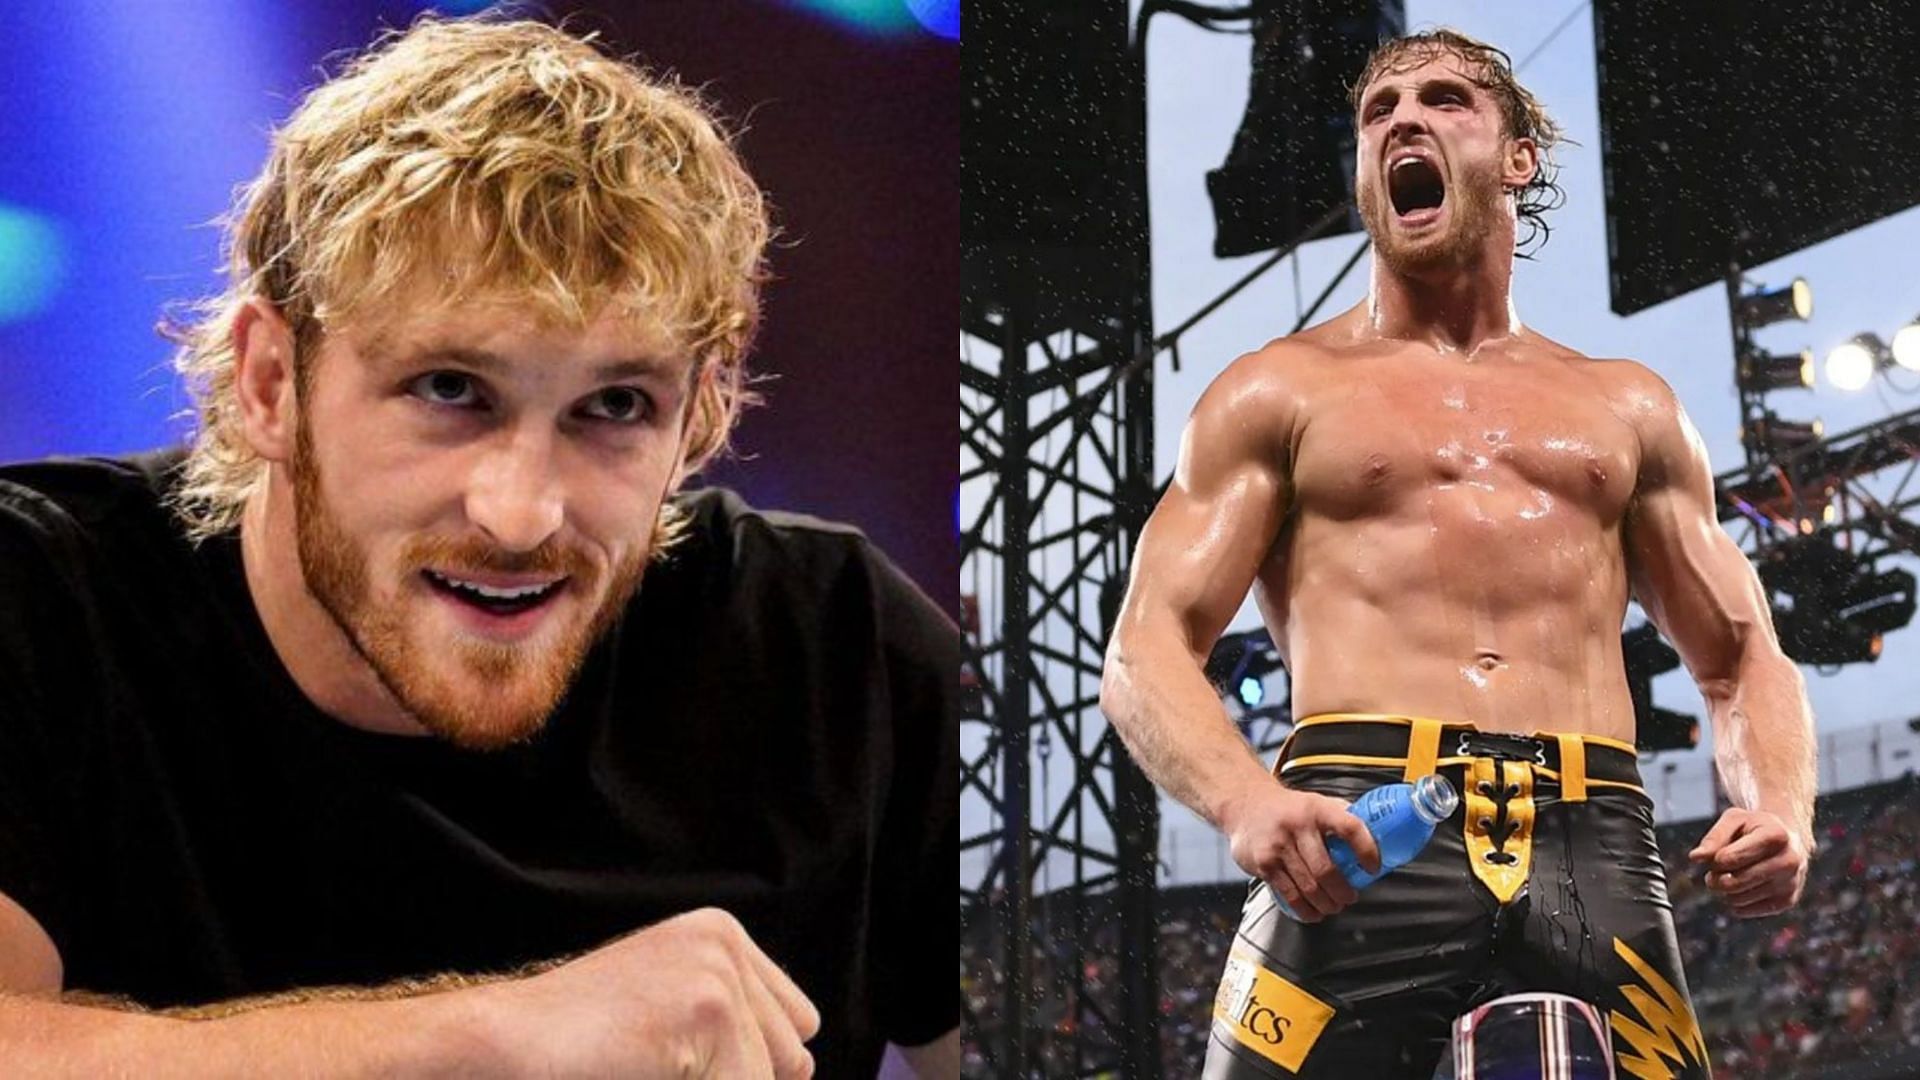 Logan Paul officially signed with WWE last June